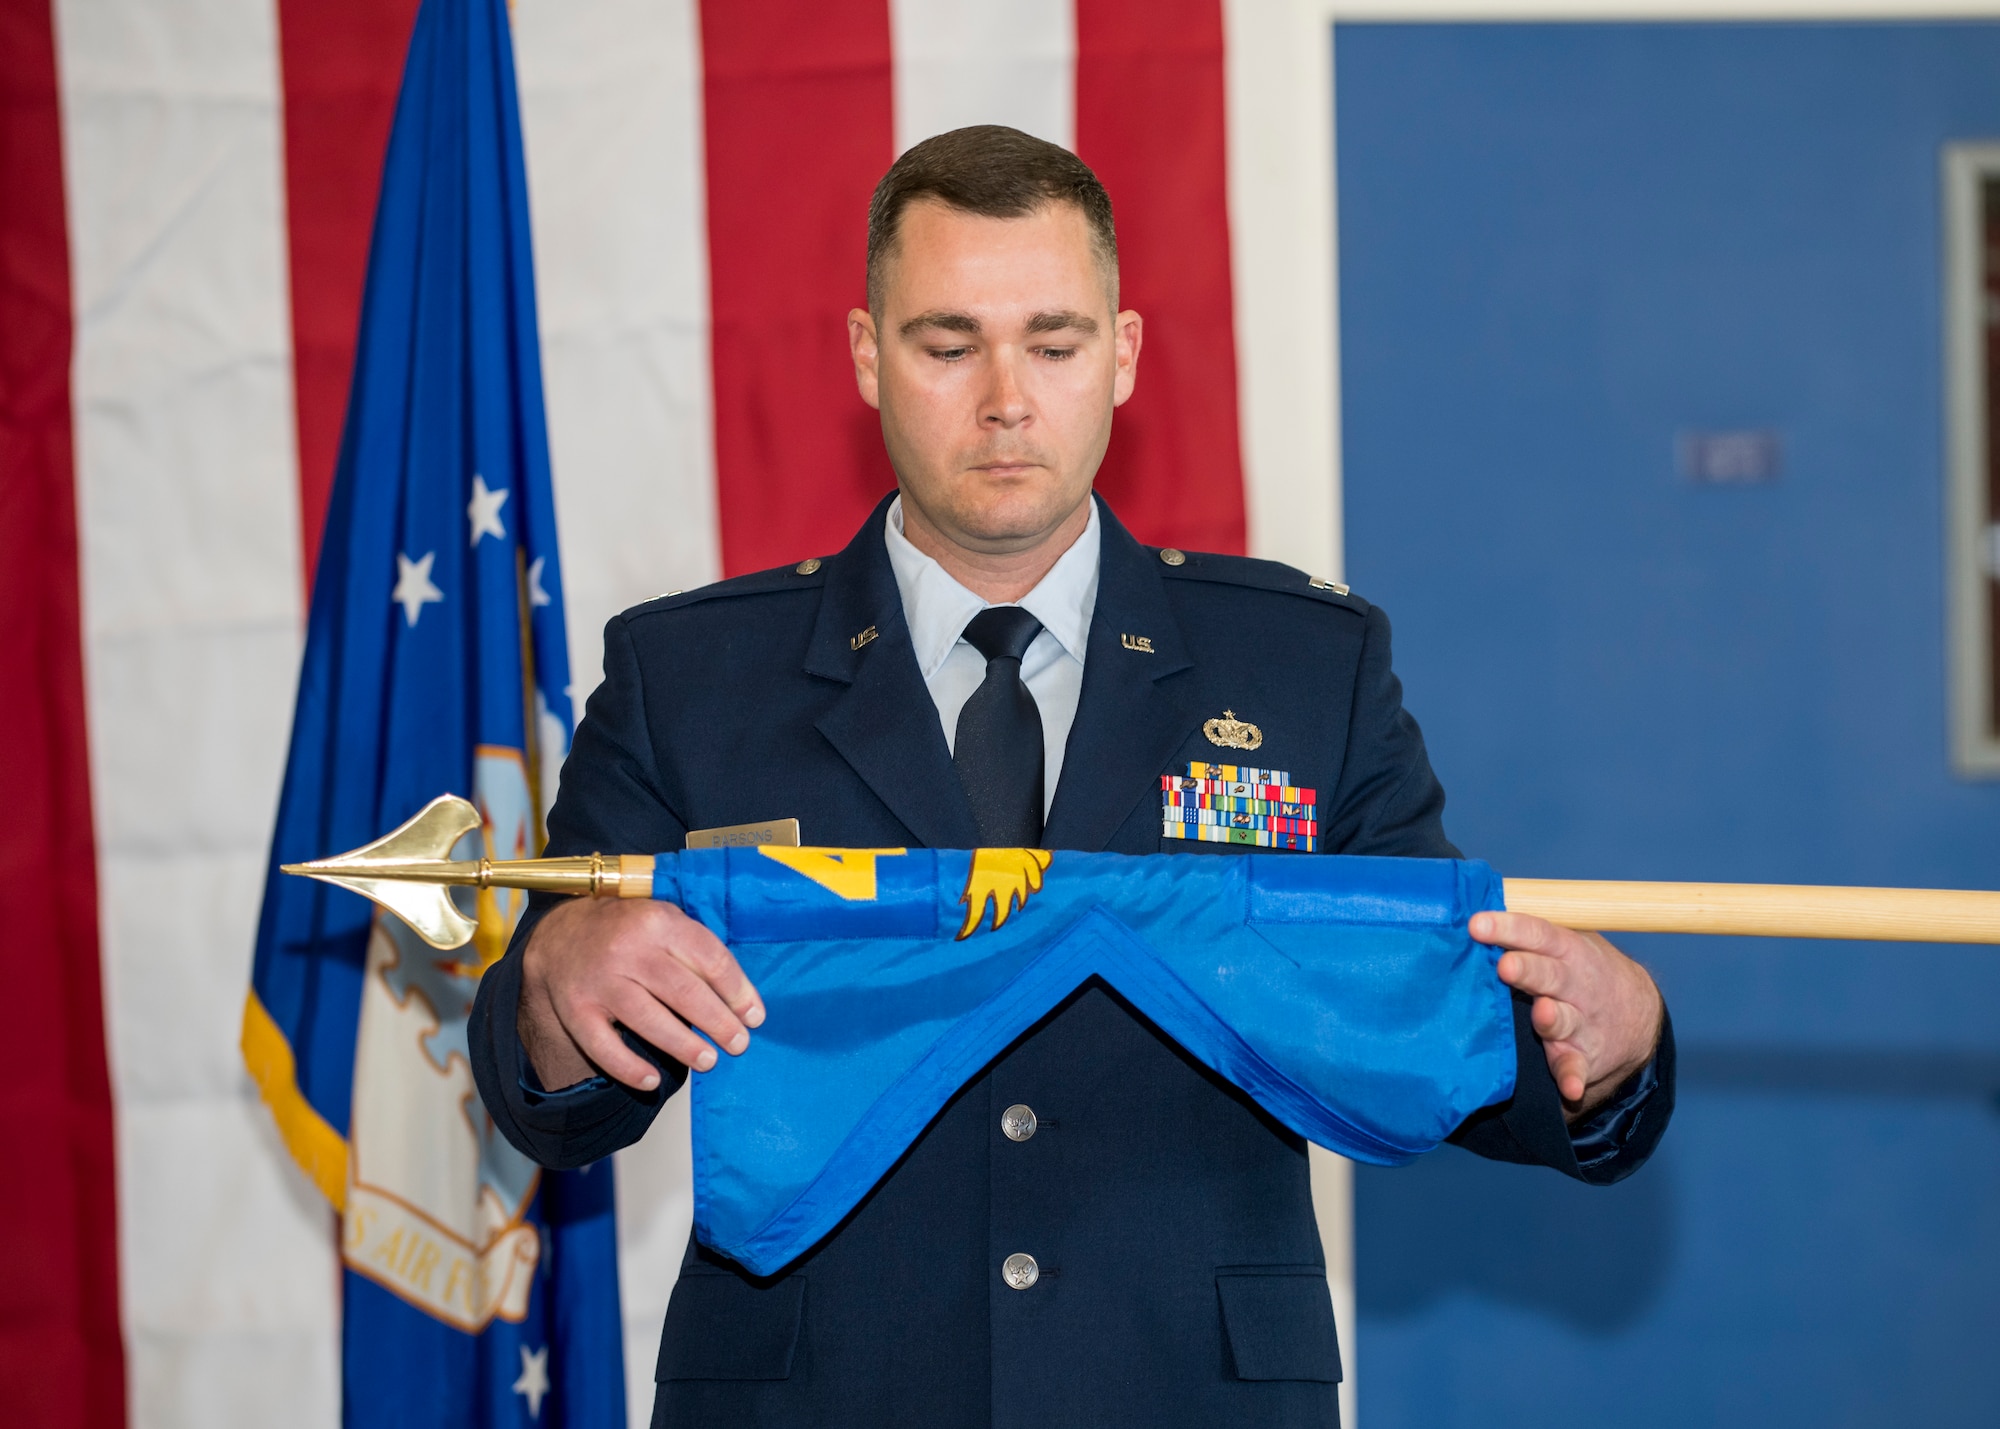 Capt. Daniel Parsons, 412th Security Forces Squadron Det. 1 Commander, unfurls his unit’s guidon during an activation and assumption of command ceremony at the 412th Test Wing Operation Location Plant 42 in Palmdale, California, Feb. 13. (Air Force photo by Giancarlo Casem)